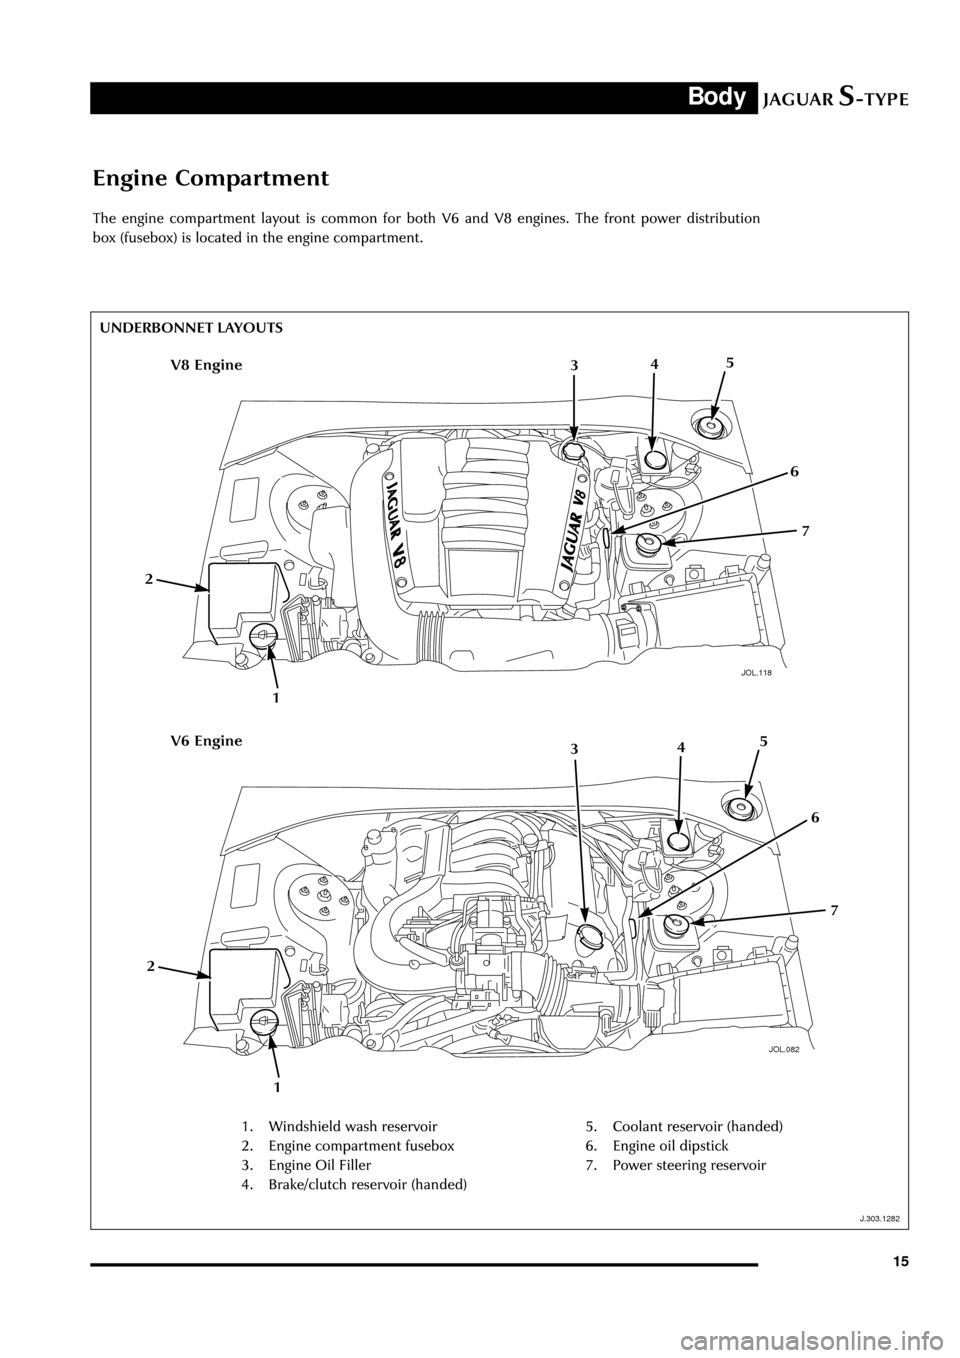 JAGUAR S TYPE 2005 1.G Technical Guide Update JAGUARS-TYPEBody
15
Engine Compartment
The engine compartment layout is common for both V6 and V8 engines. The front power distribution
box (fusebox) is located in the engine compartment.
JOL.118
UNDE